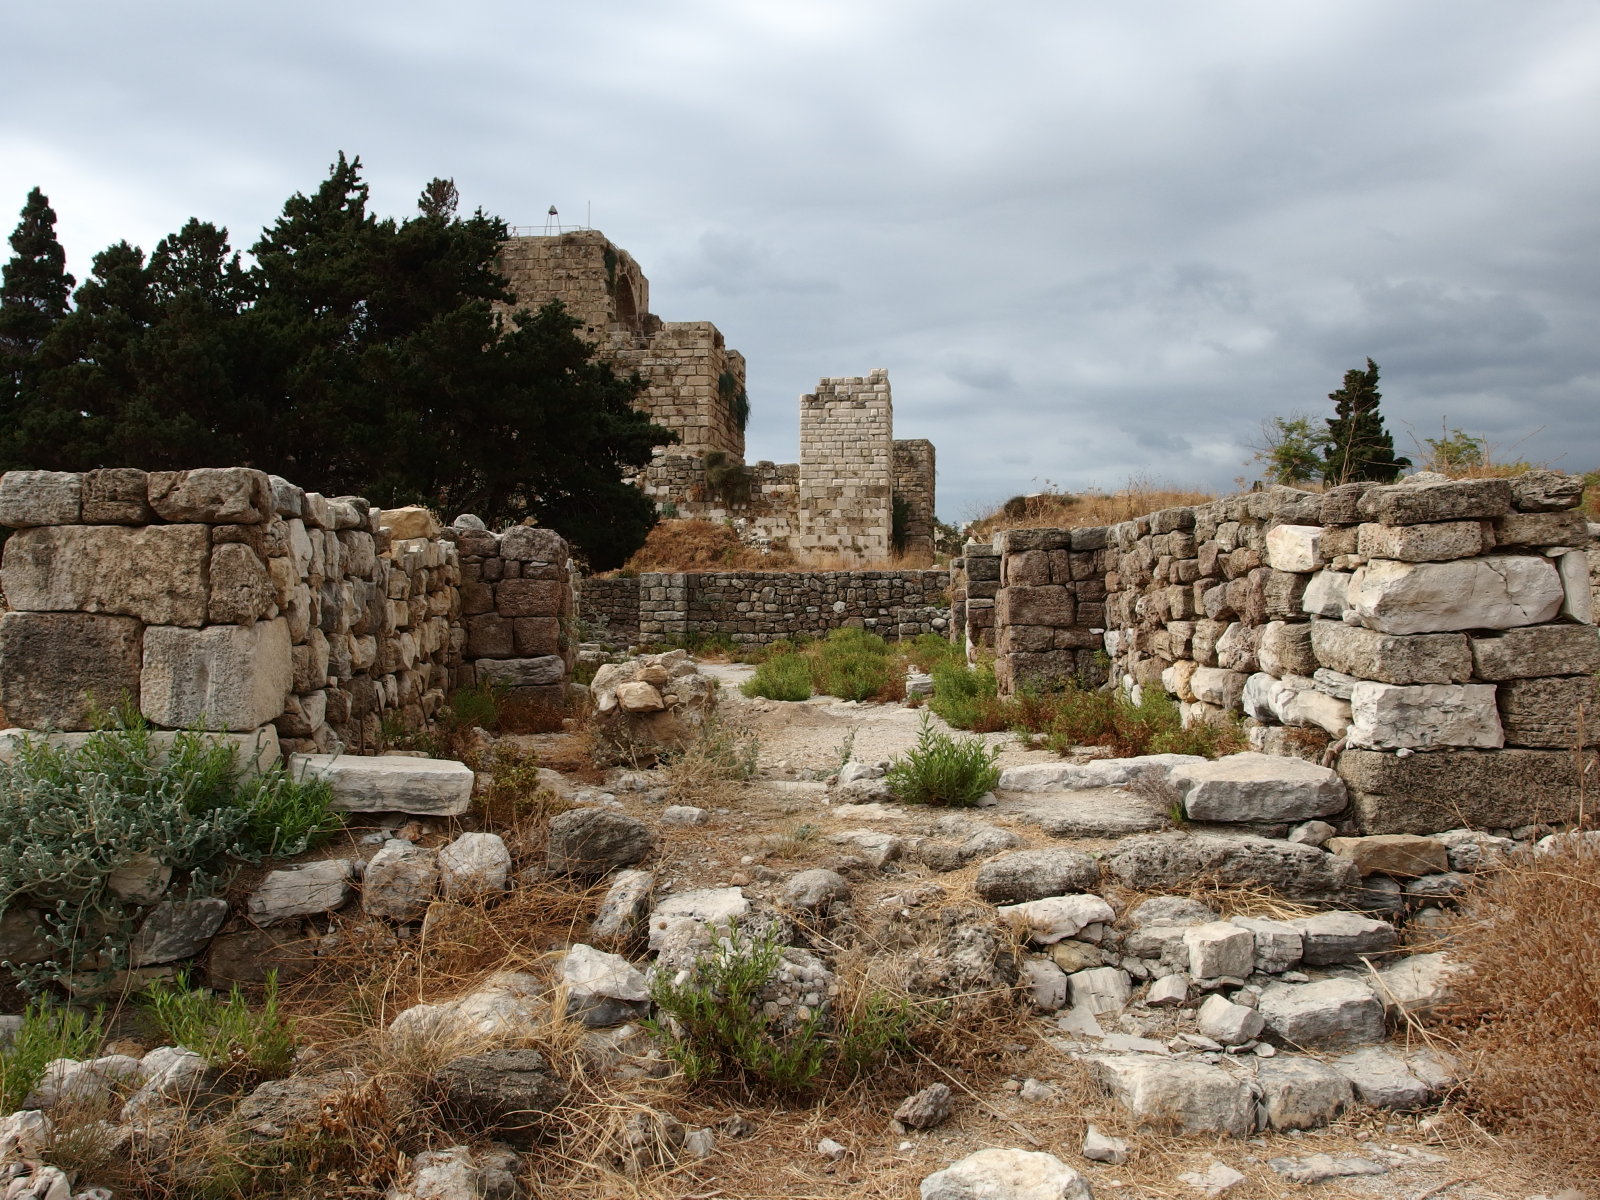 Ｌ型神殿（ビブロス）｜ The foundations of the “L” Temple, Byblos